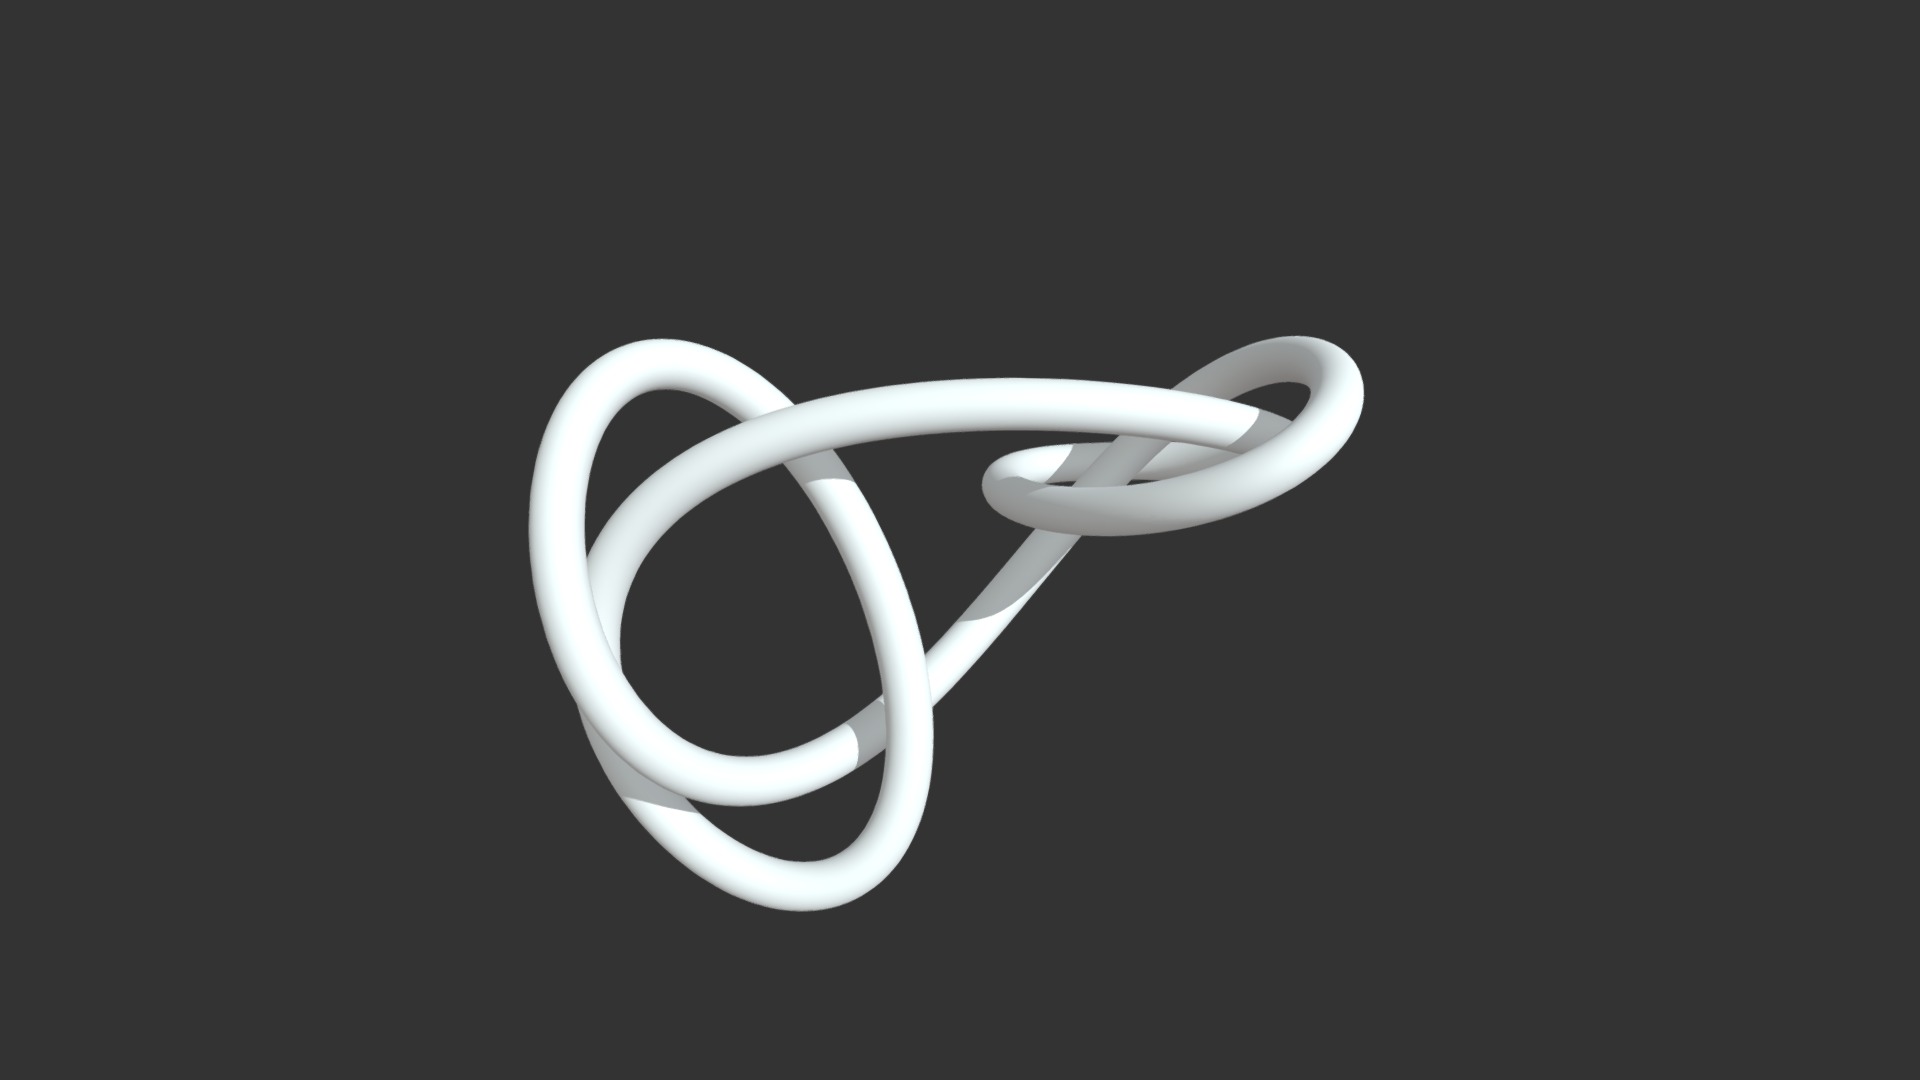 3D model Granny knot - This is a 3D model of the Granny knot. The 3D model is about a white ring with a black background.